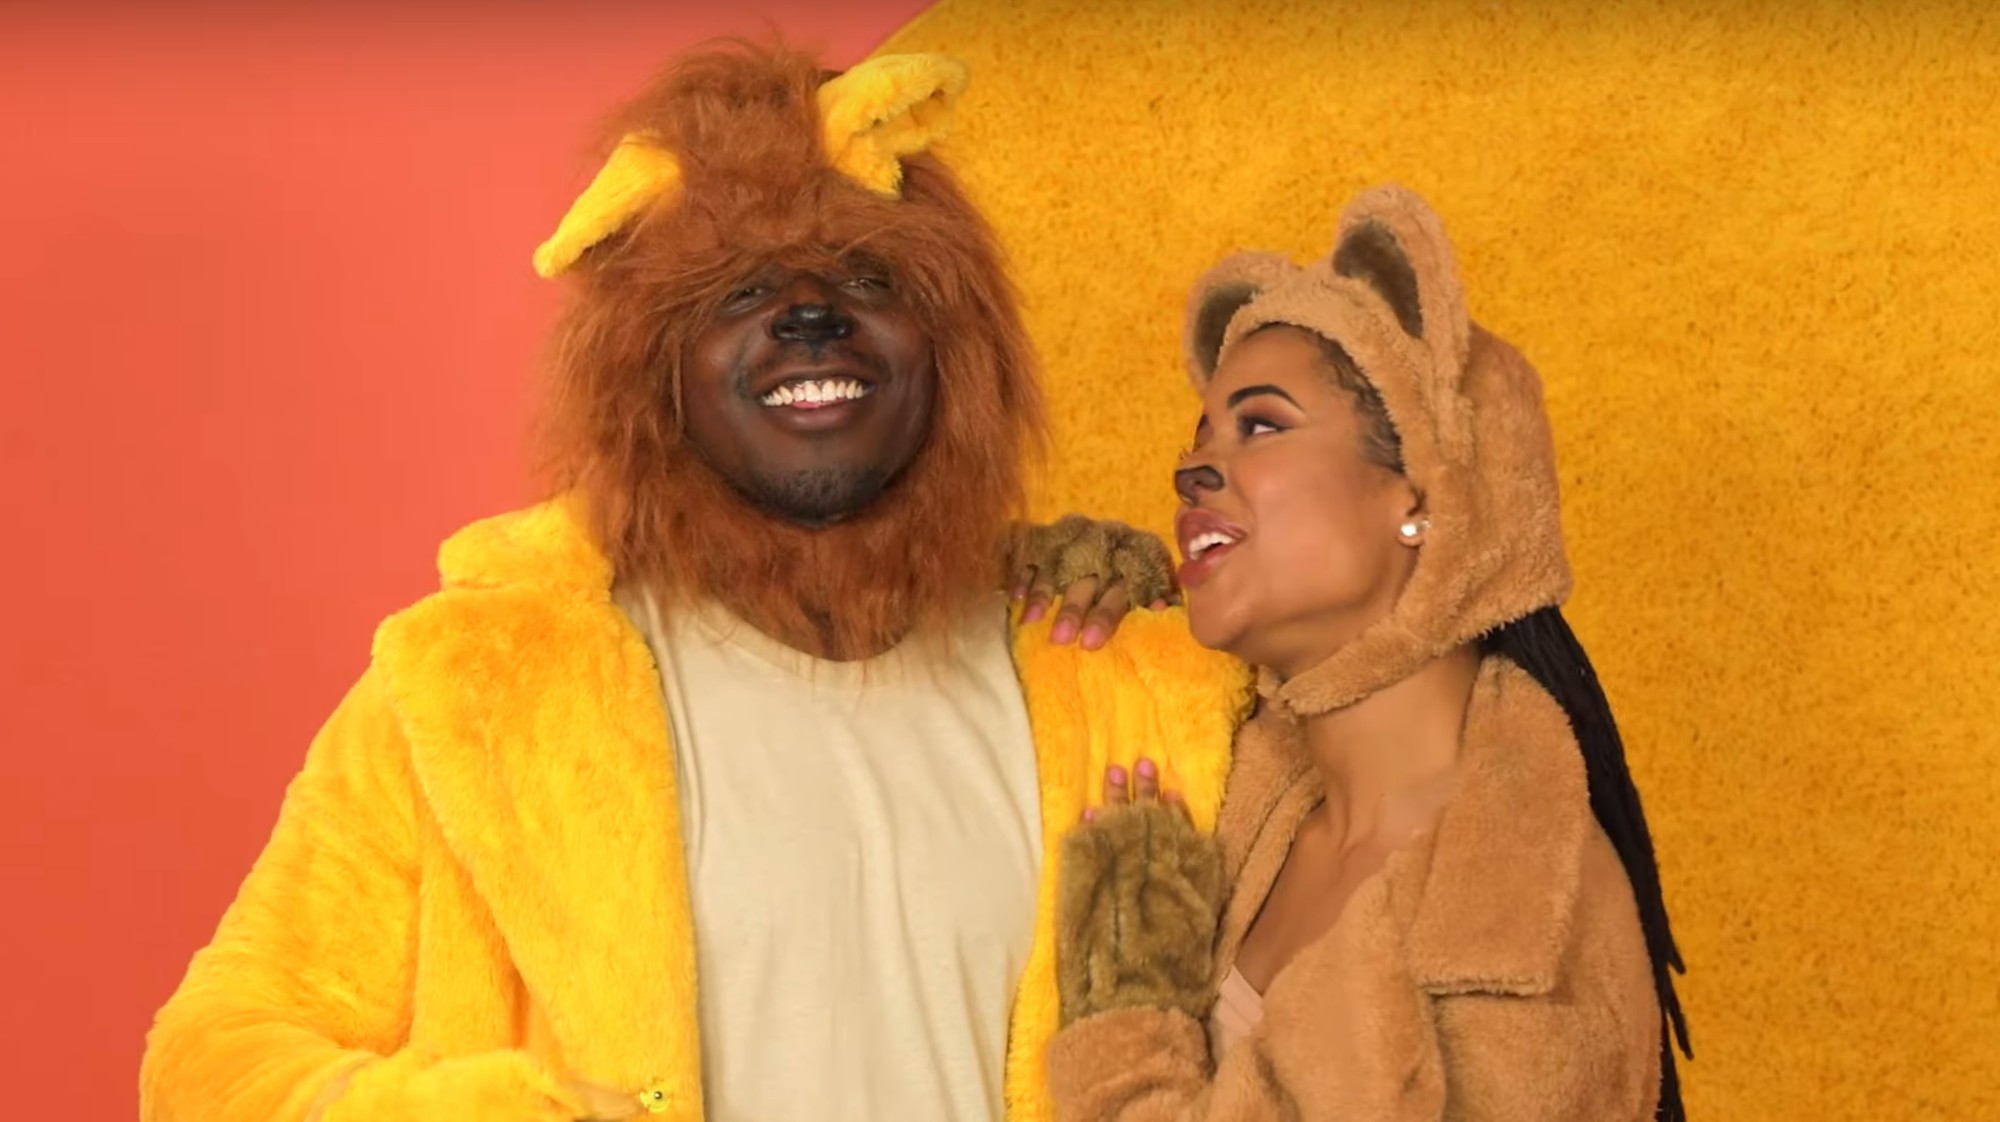 Zazu Lion King Porn - A 'Lion King' Porn Parody Exists and We Can Feel the Love - VICE